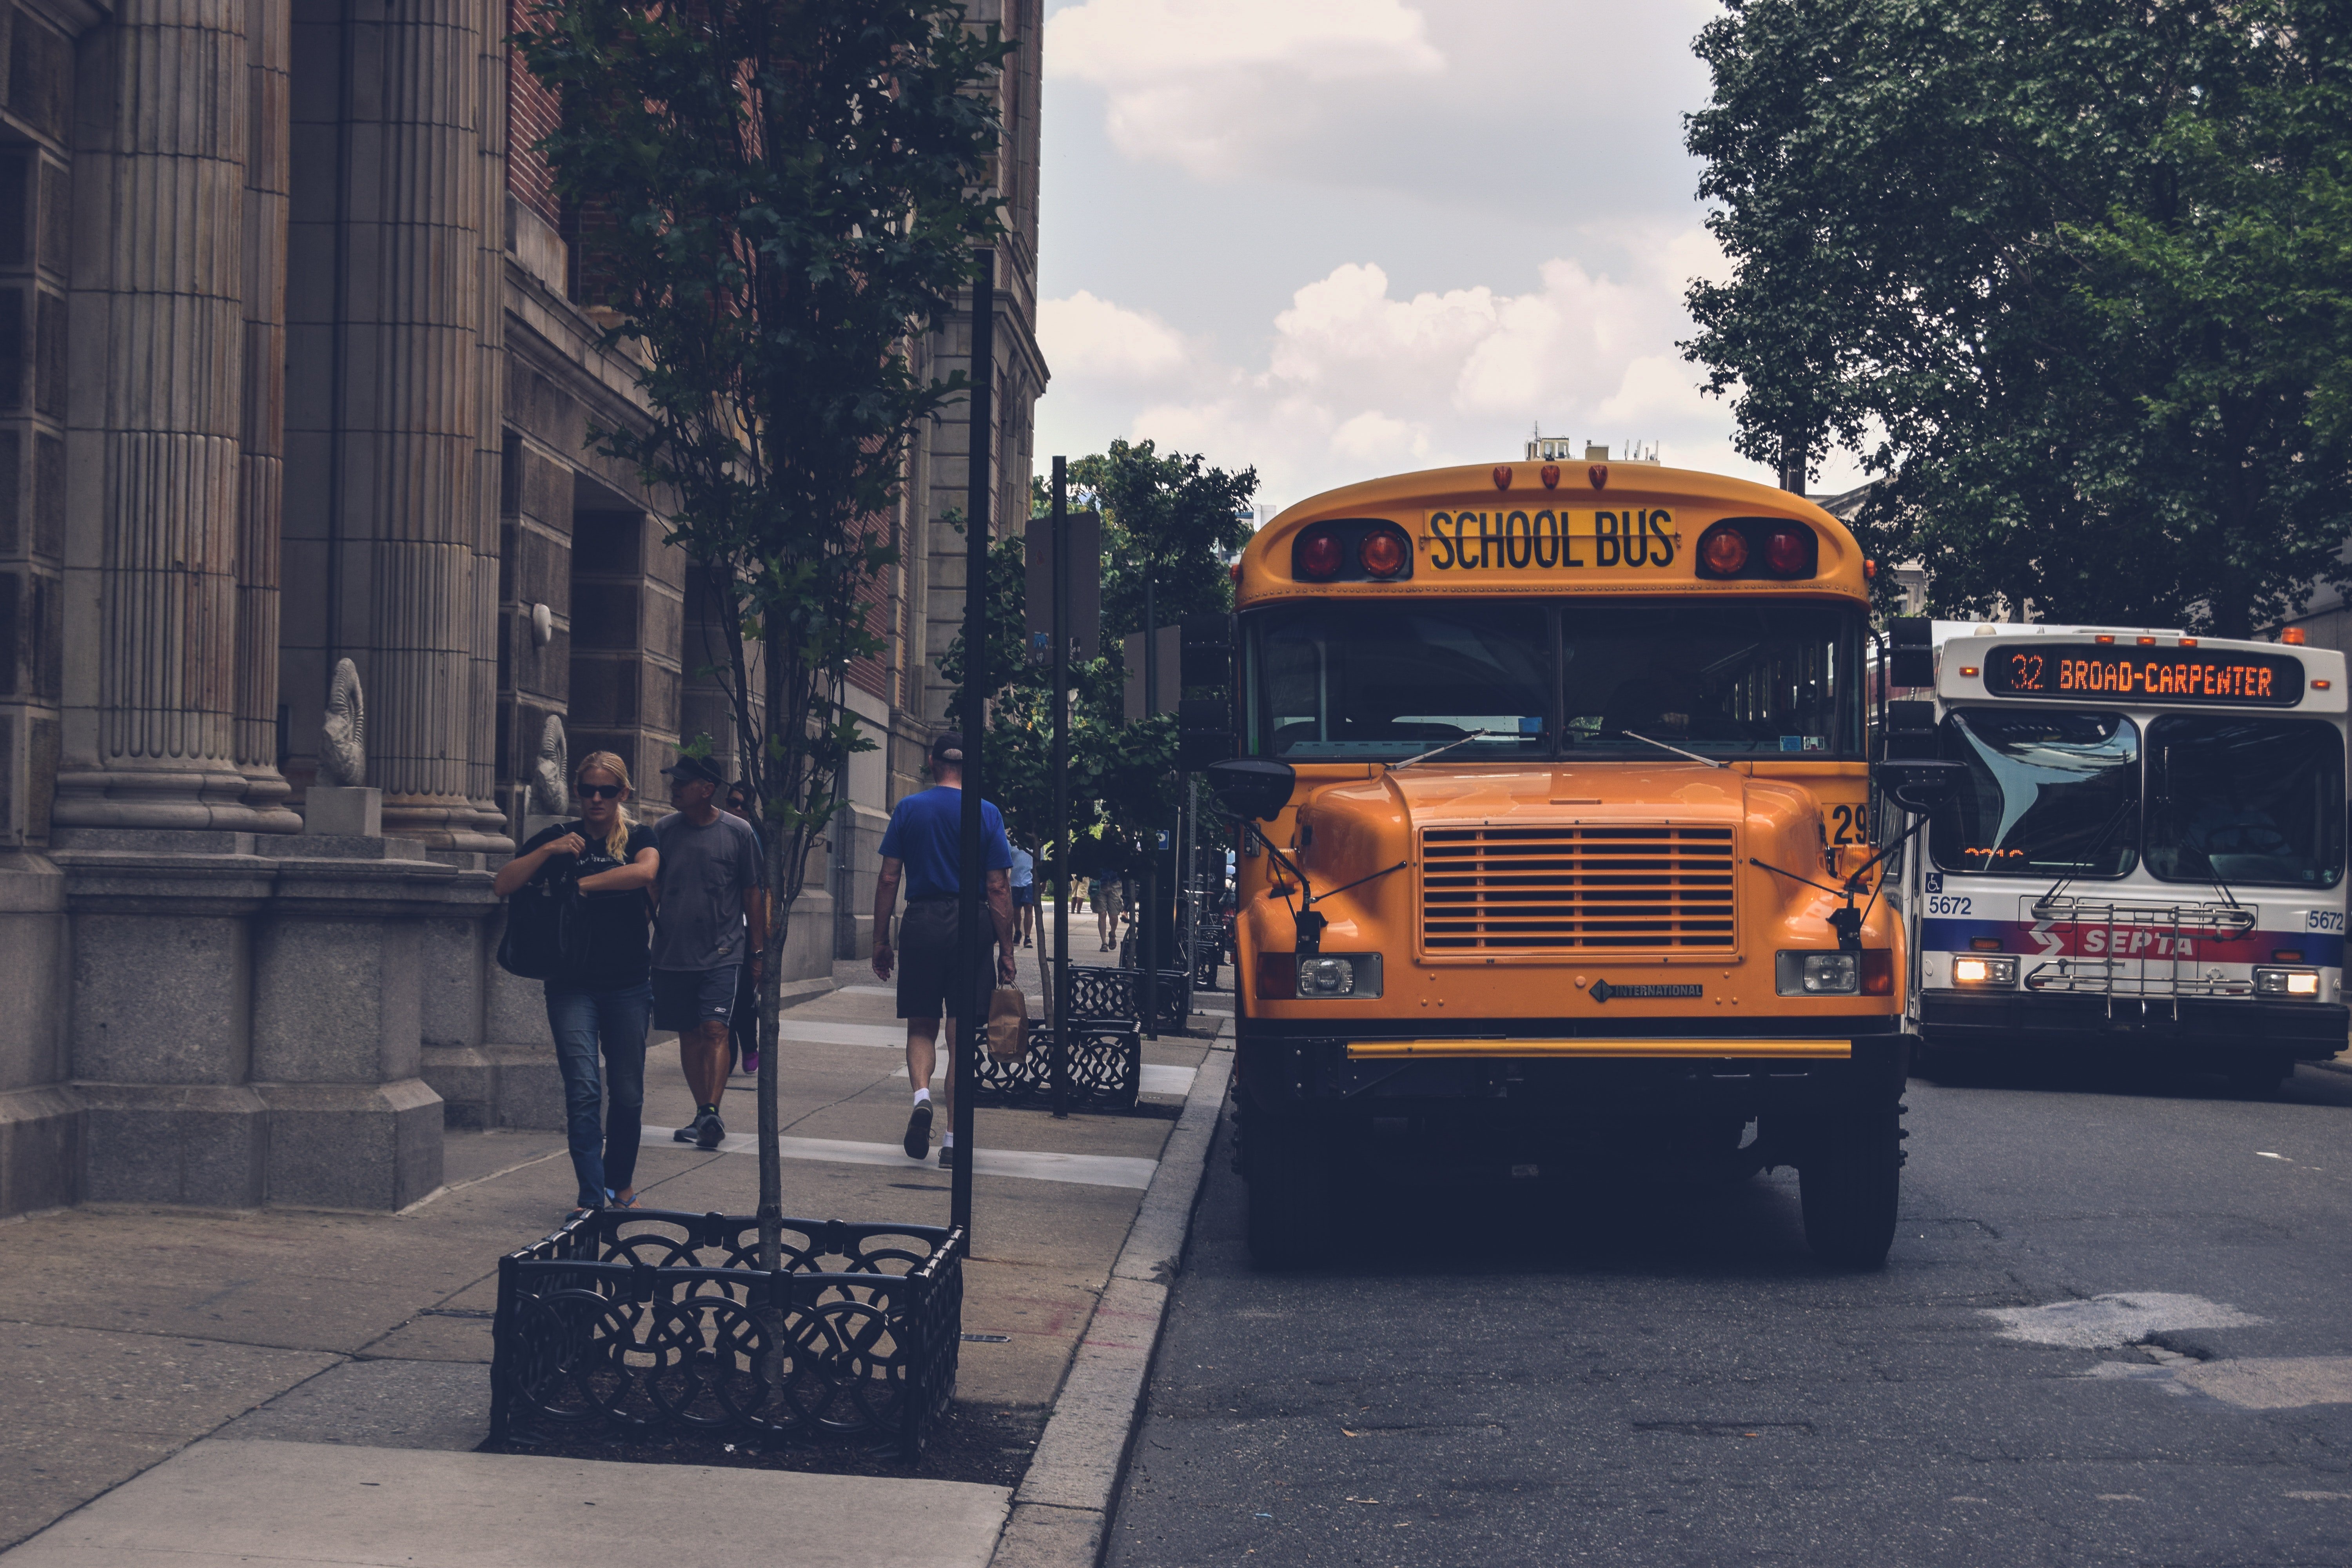 Martin would usually take the school bus going home, but he would come home late which bothered his mom. | Source: Pexels